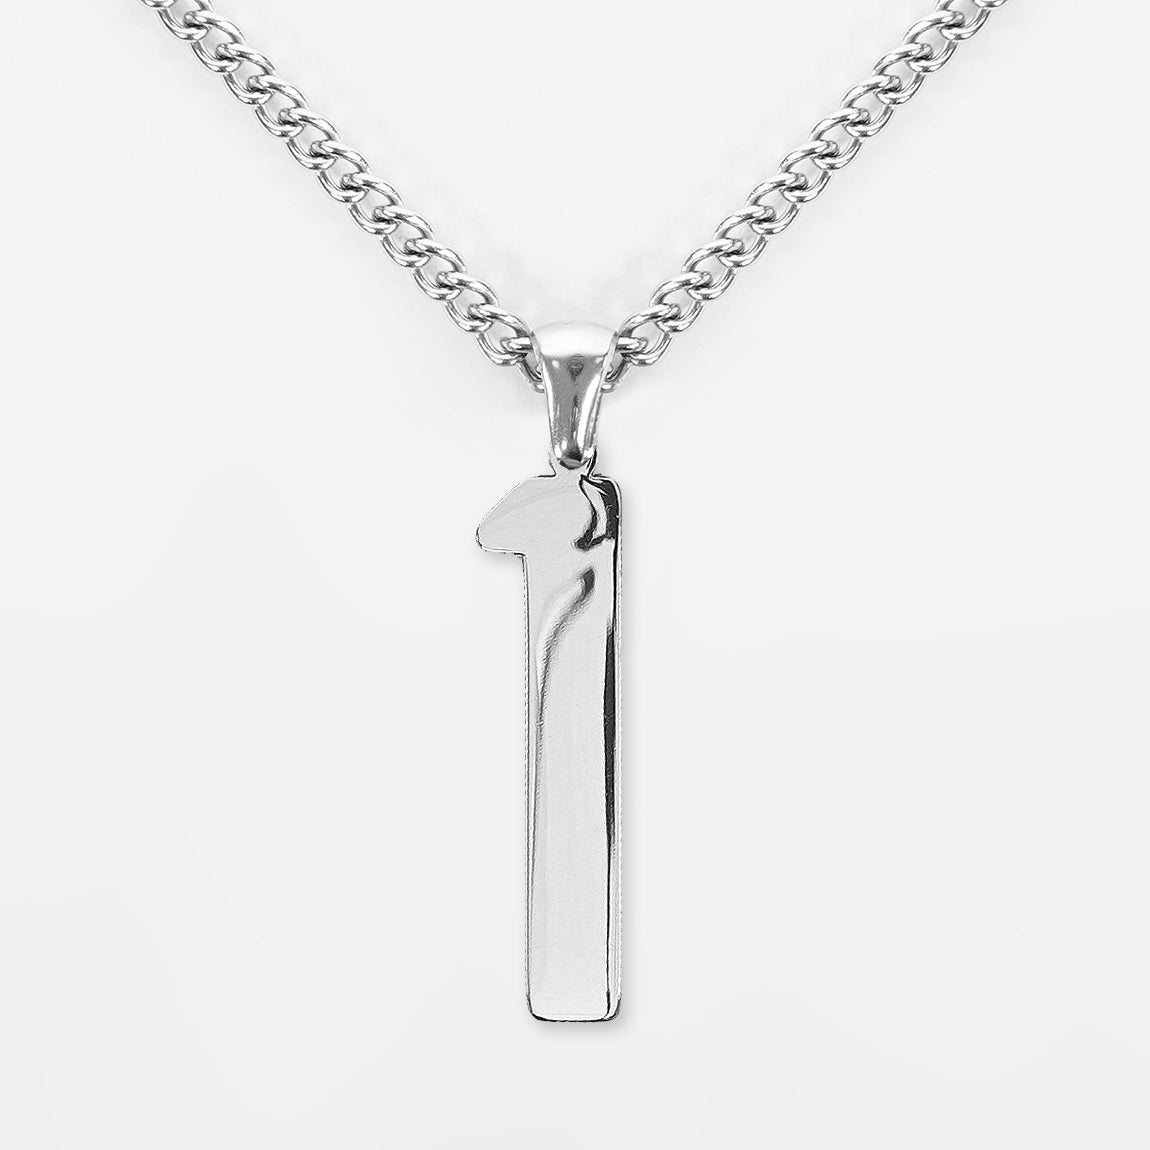 1 Number Pendant with Chain Necklace - Stainless Steel